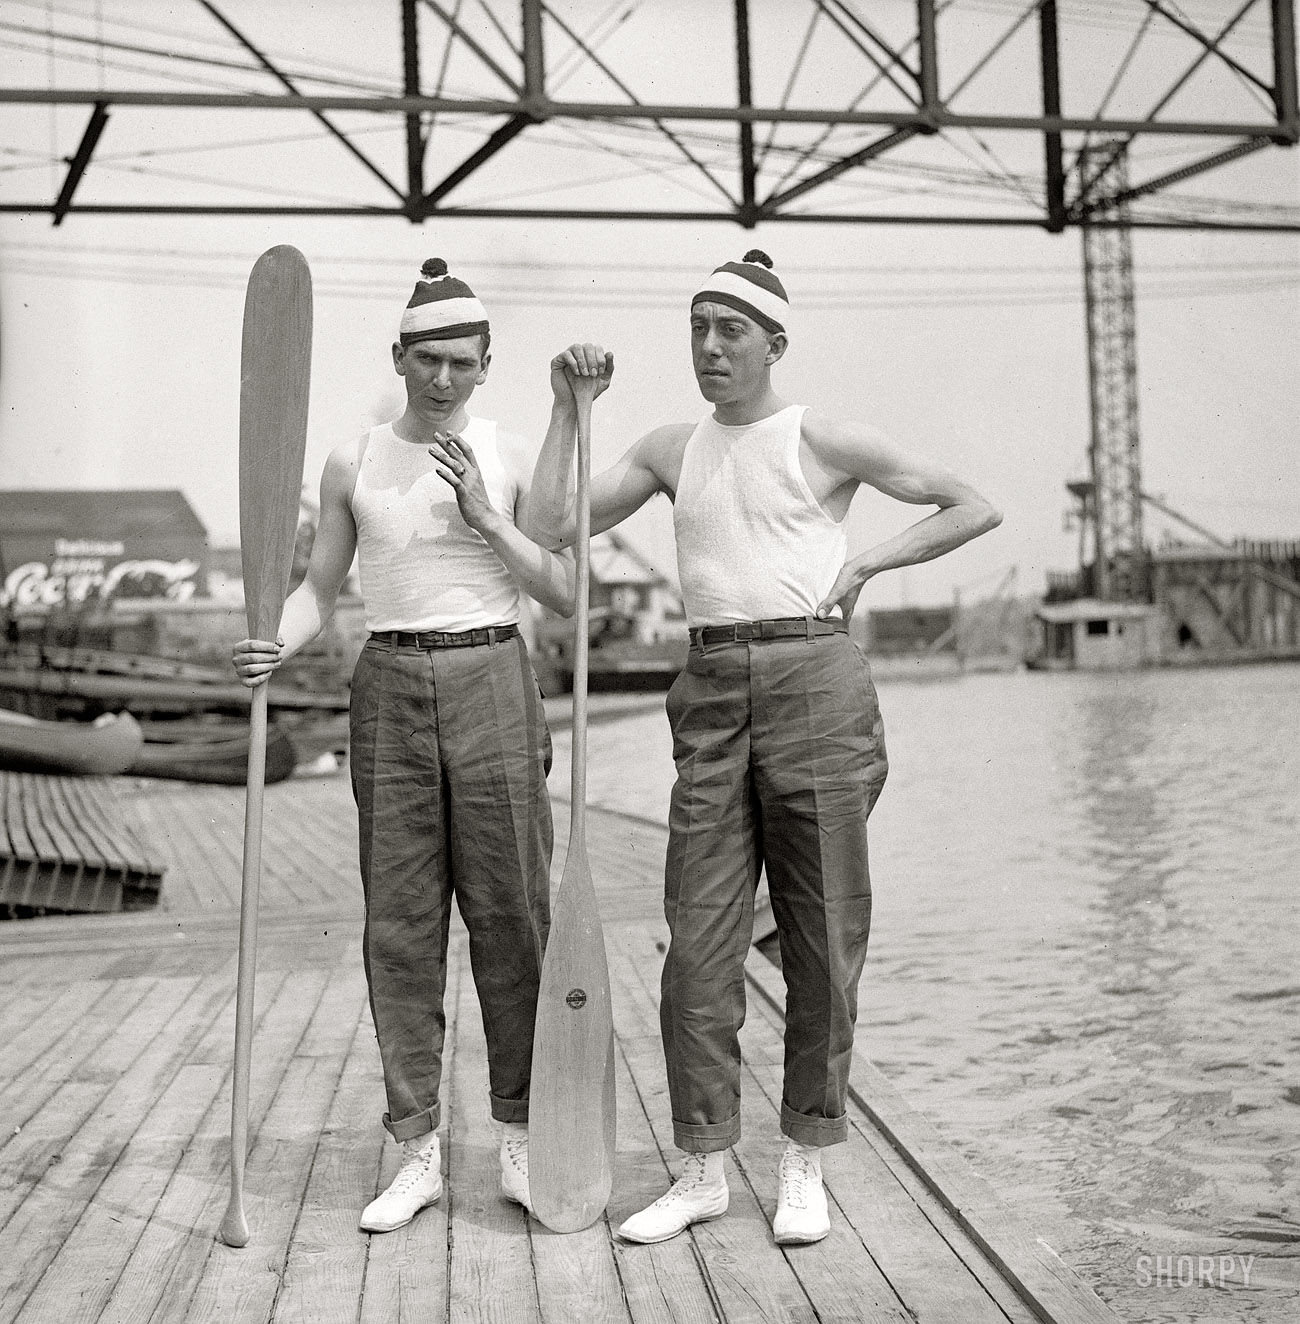 Washington circa 1919. "Bob Marmion." Robert "Bob" Marmion, on the right, and an unidentified partner. With canoe paddles from Walford's Sporting Goods. National Photo Company Collection glass negative. View full size.